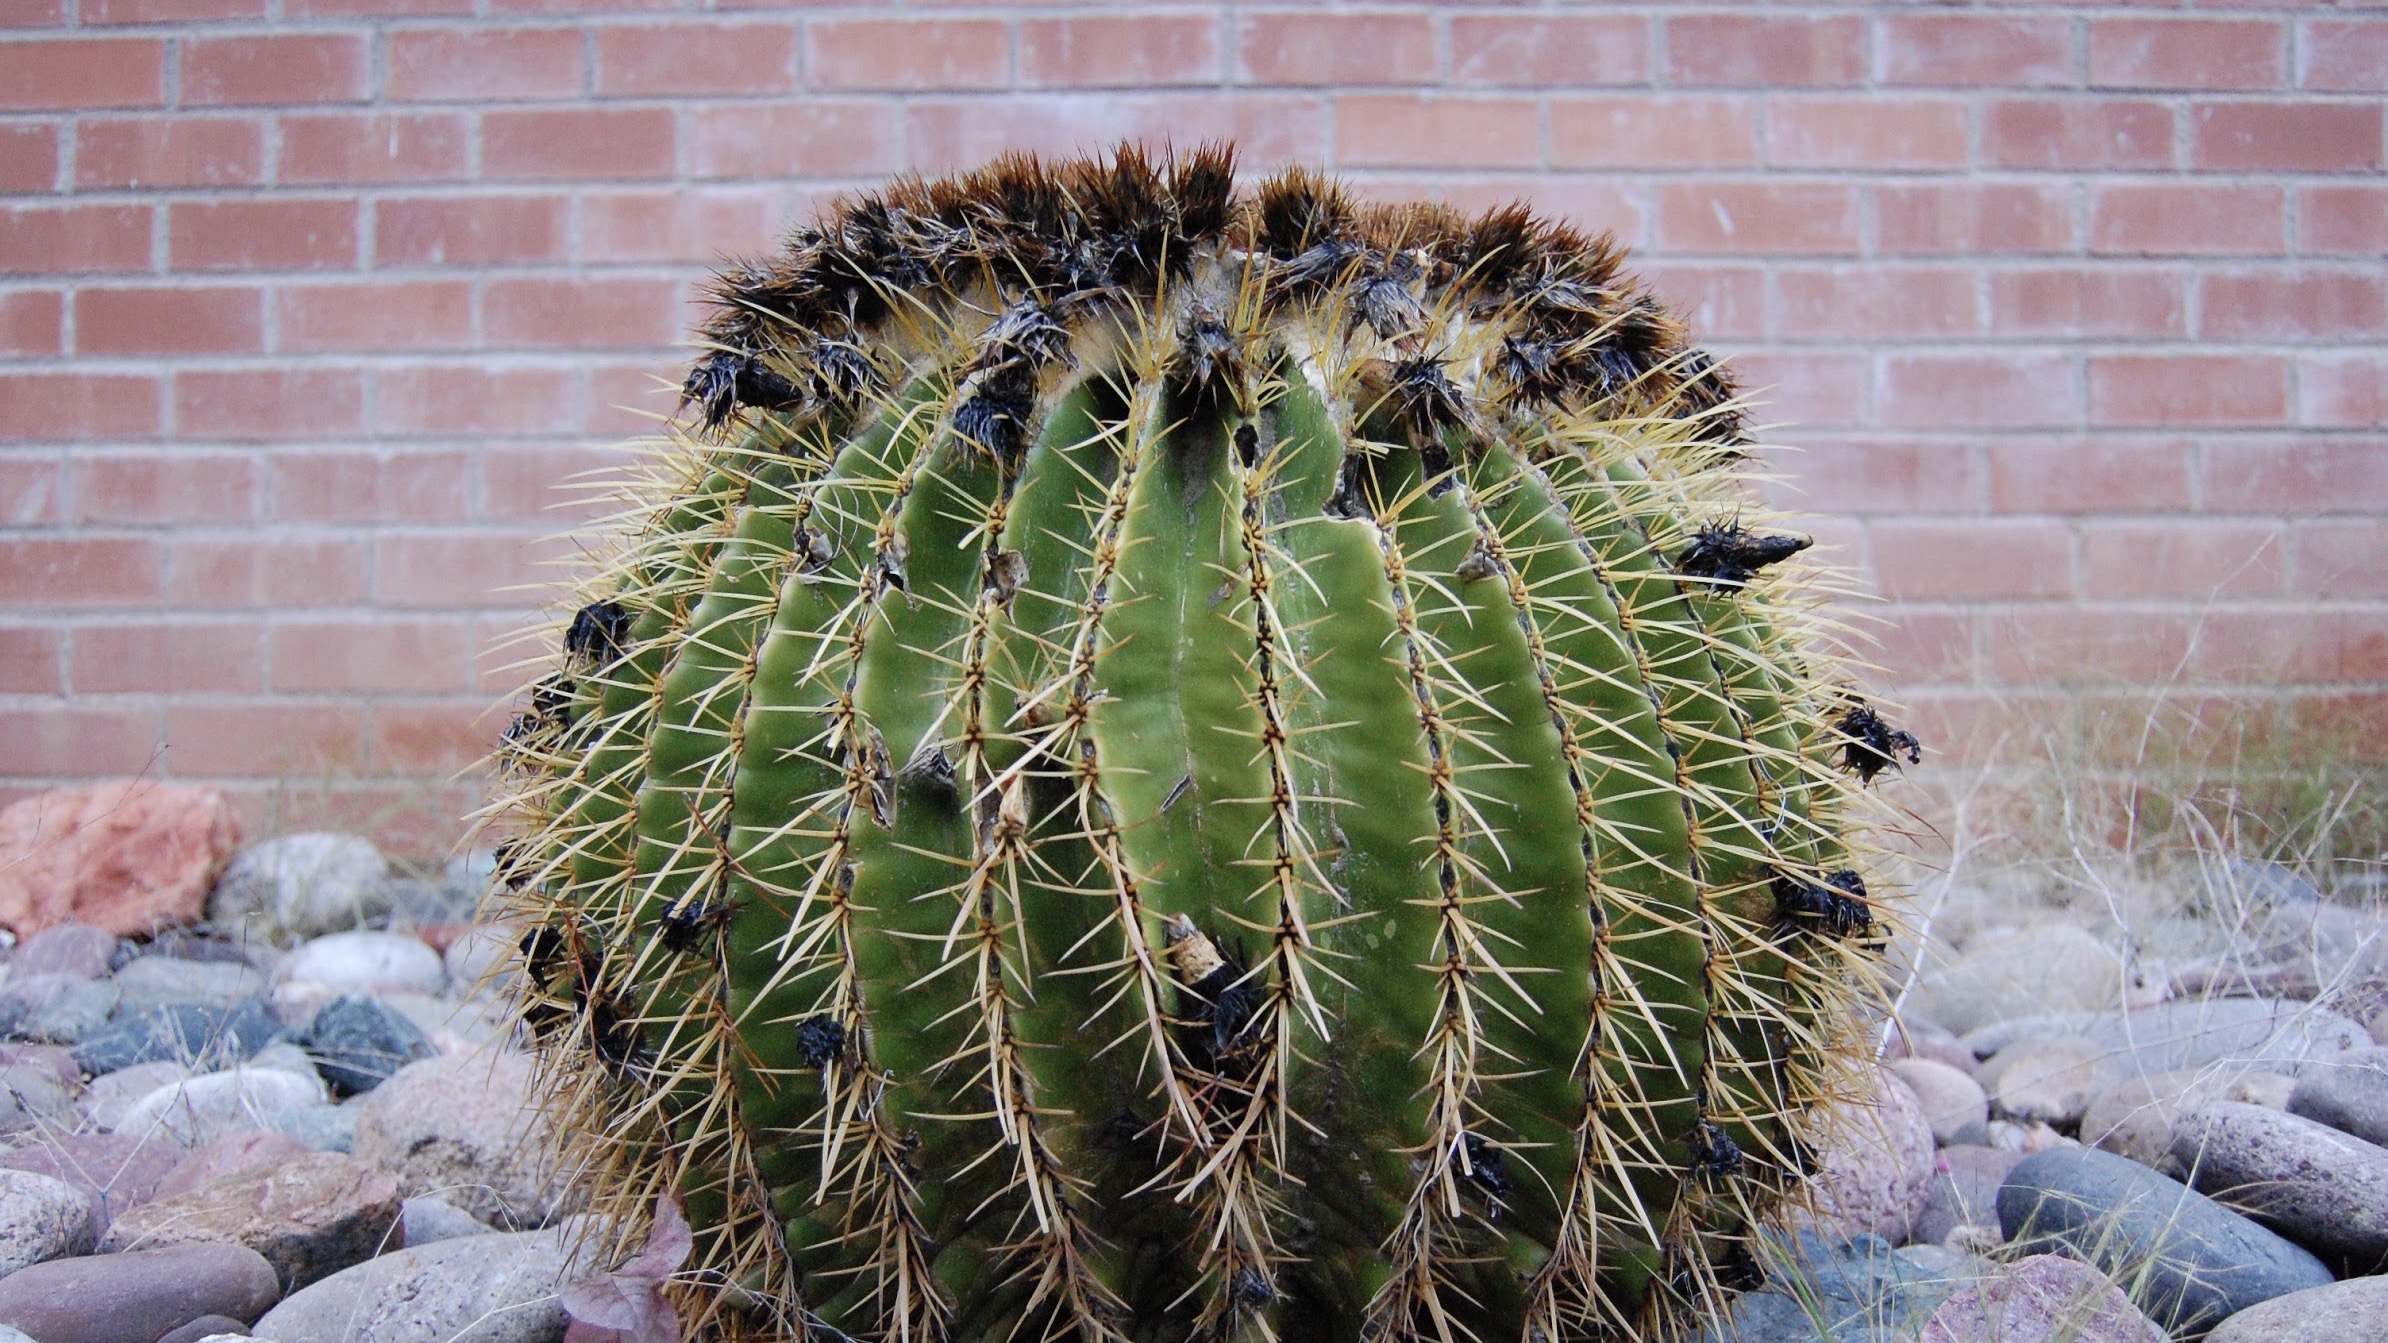 Another cute, bowl-shaped cactus